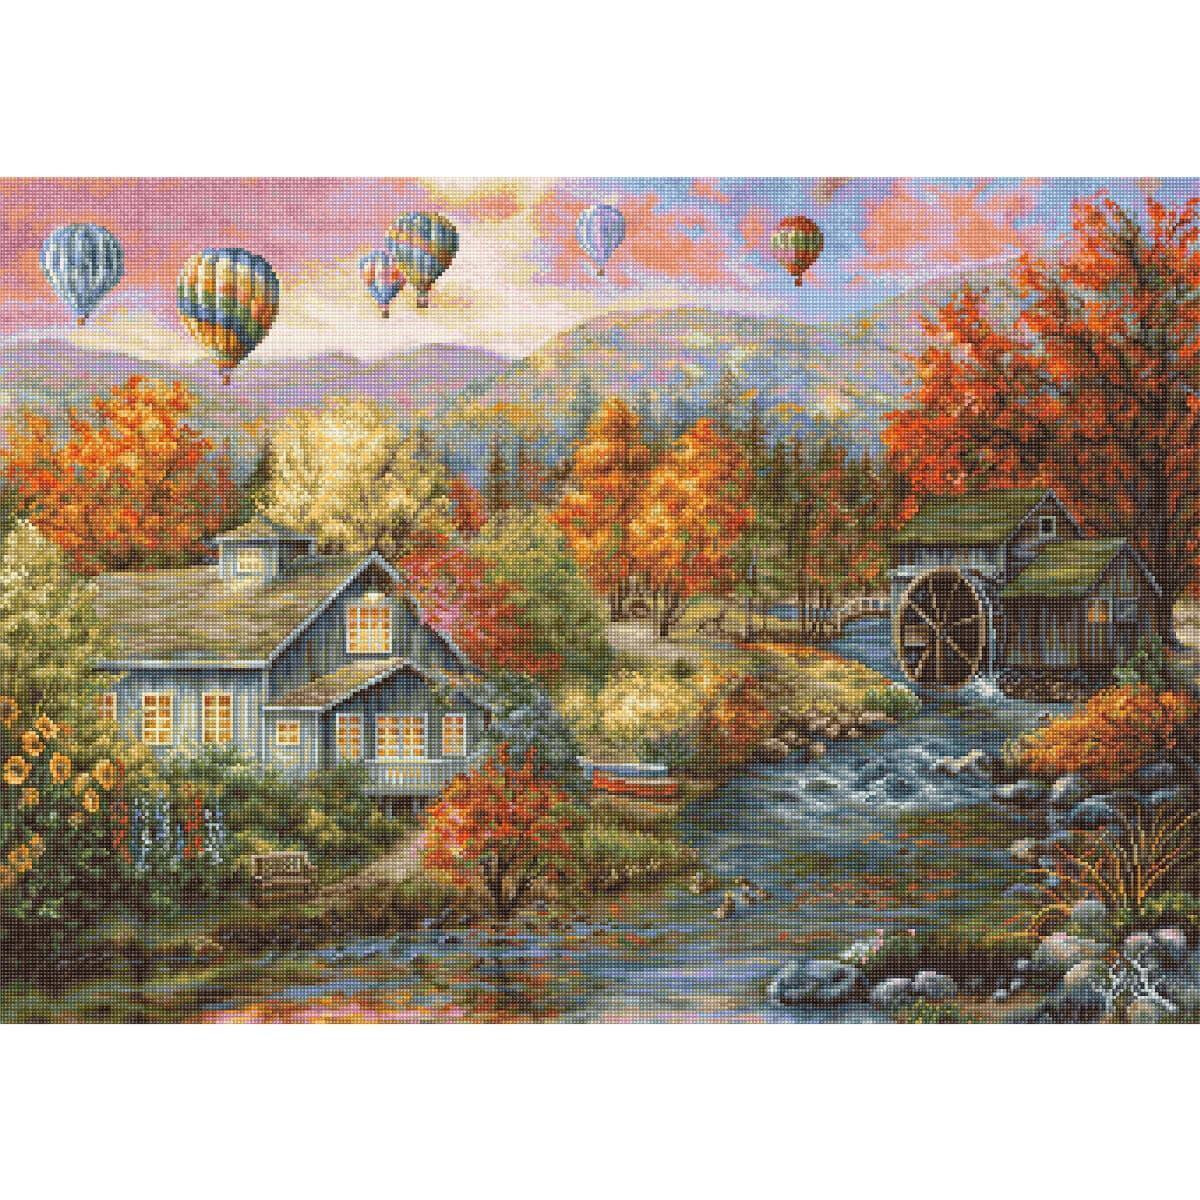 A picturesque autumn scene shows a charming house...